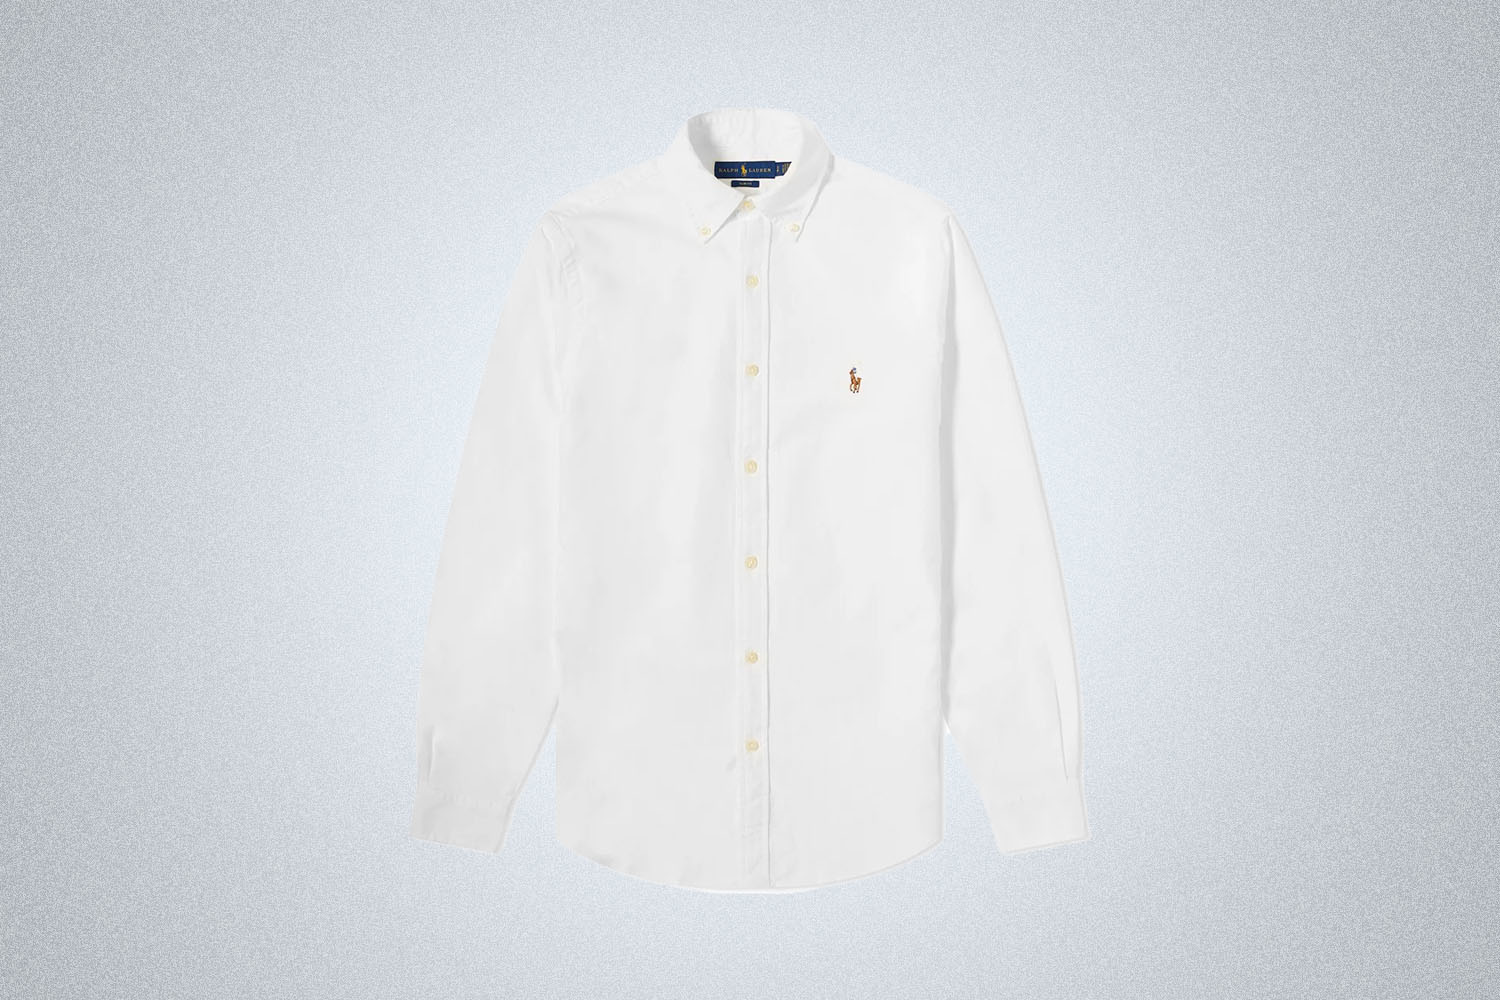 Polo Ralph Lauren Oxford Shirt on a gray background